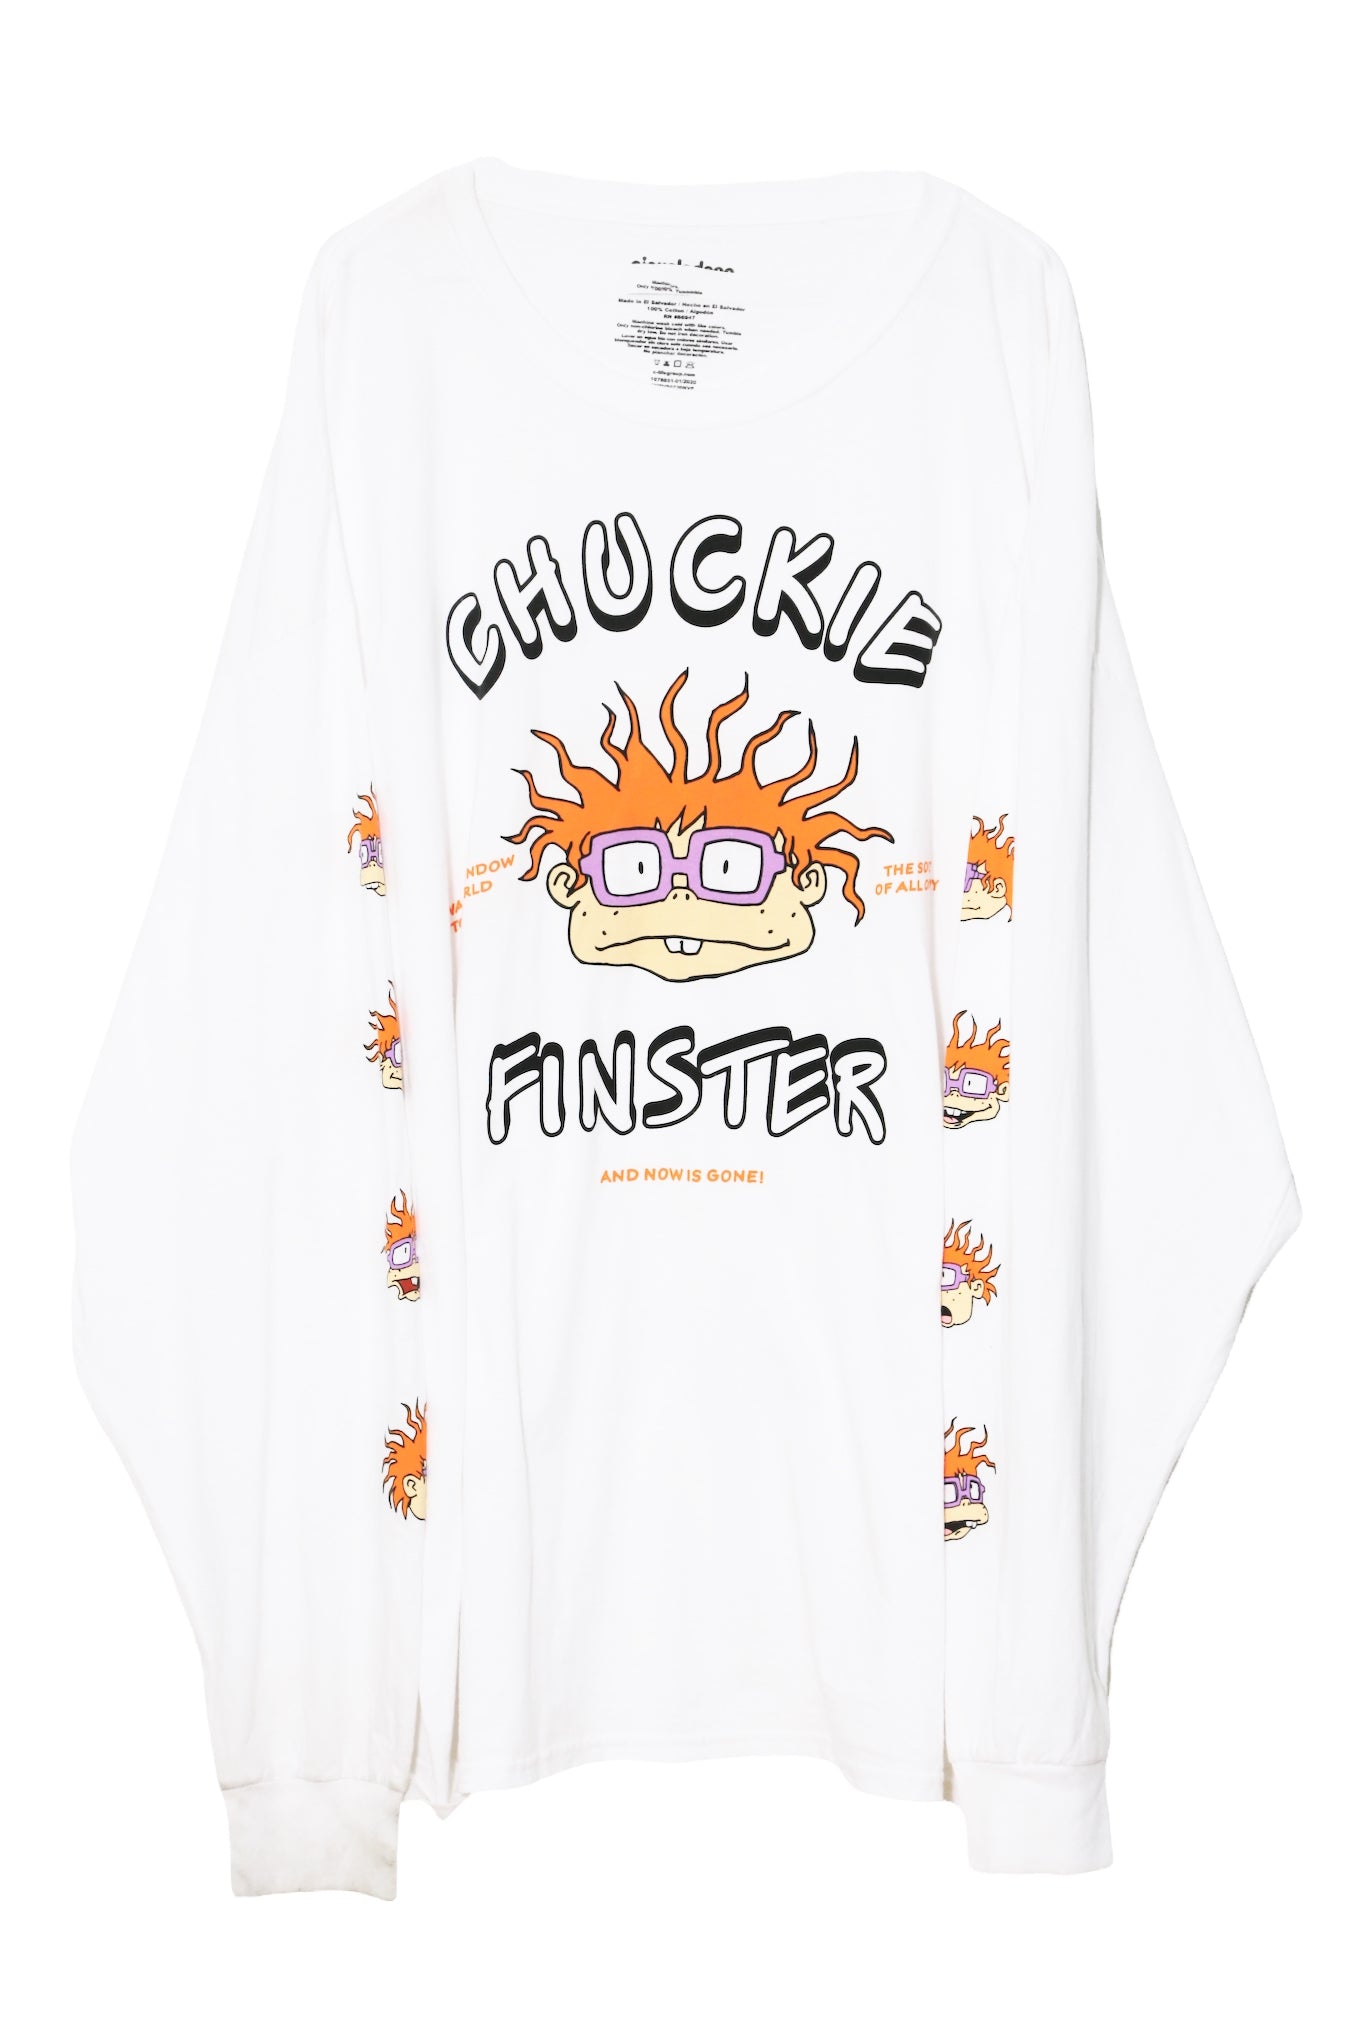 CHUCKIE FINSTER OVER SIZE LONG SLEEVE T-SHIRT